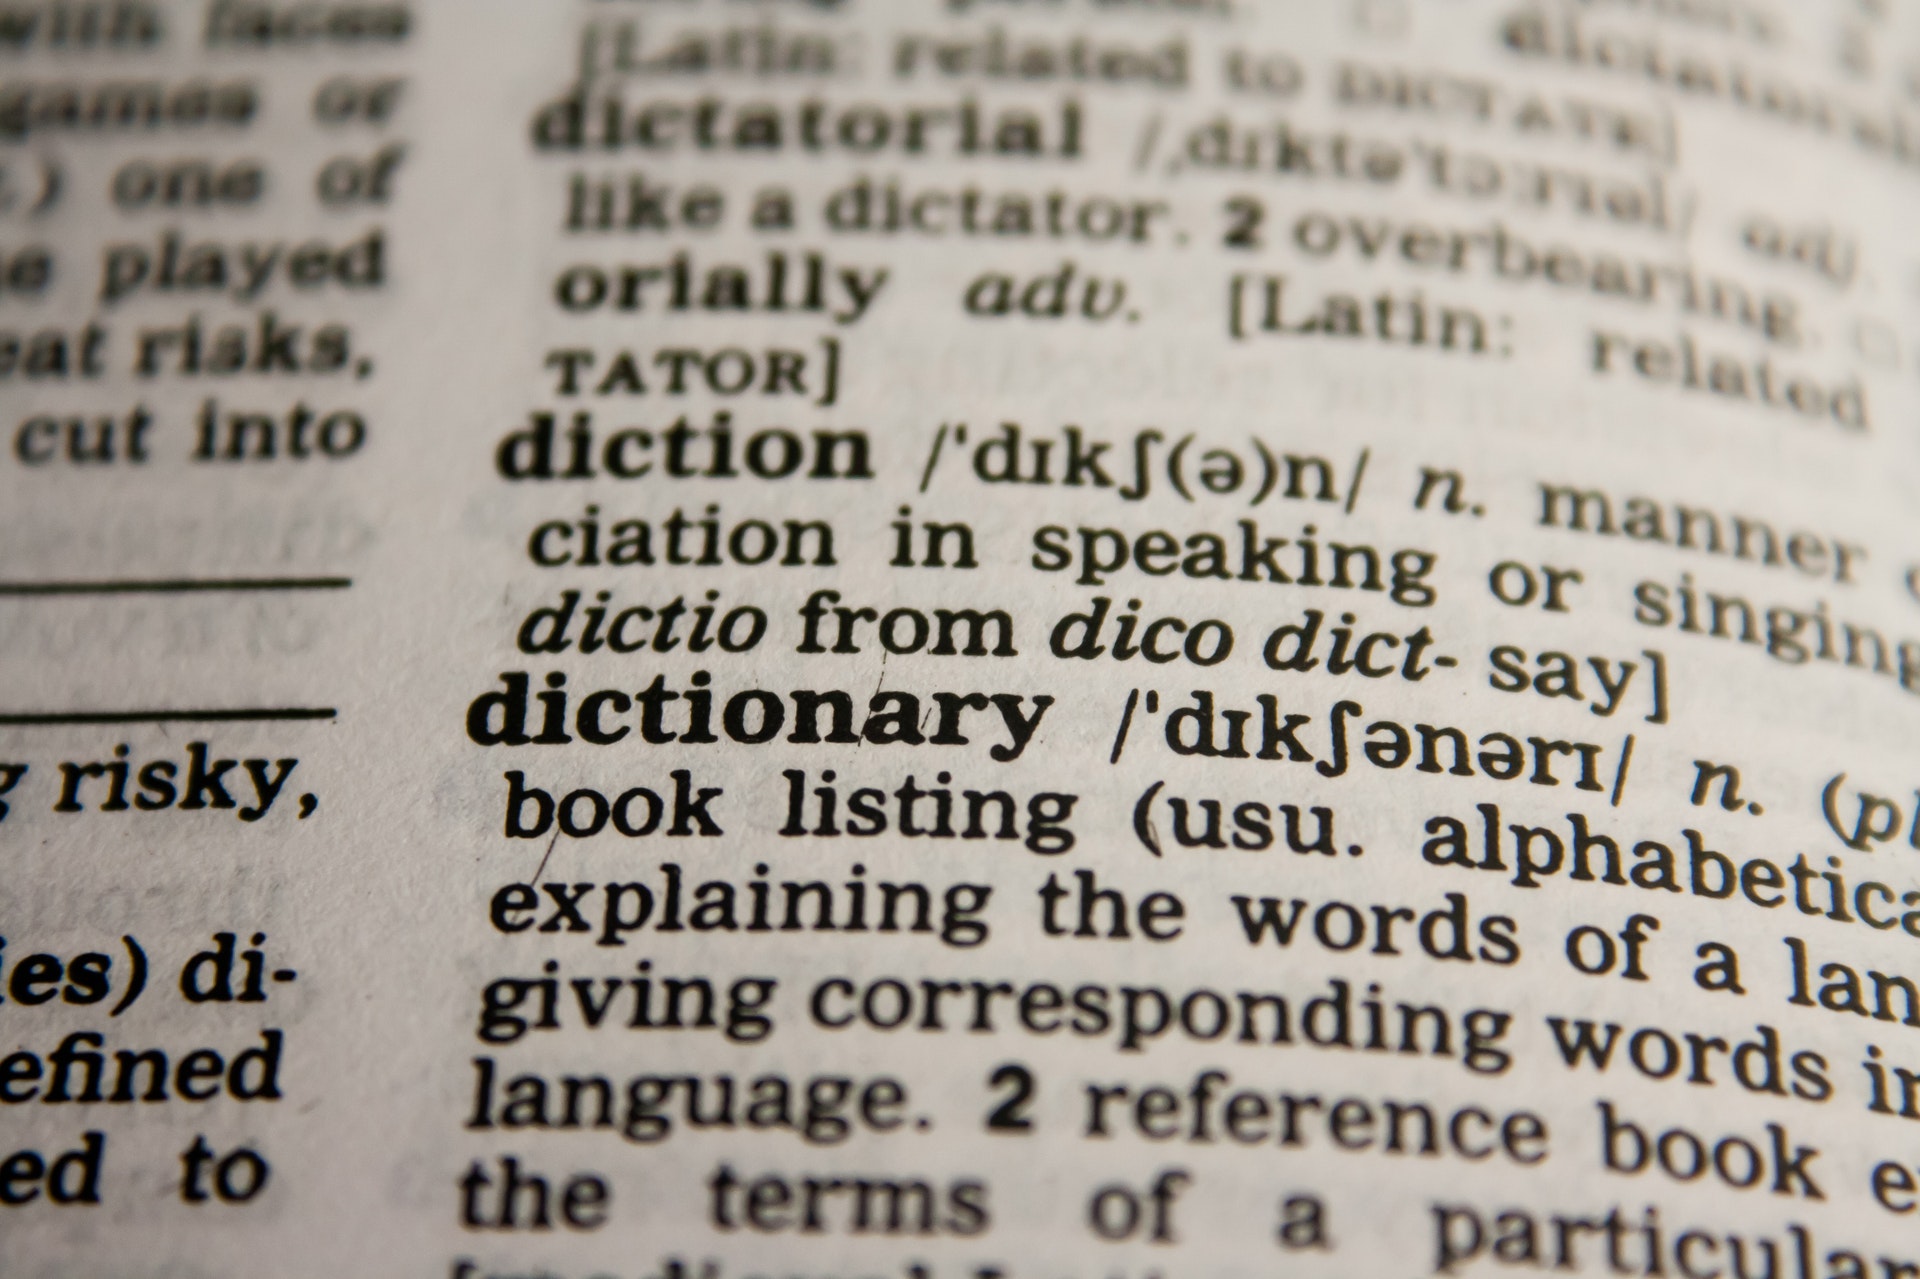 Terms and definitions